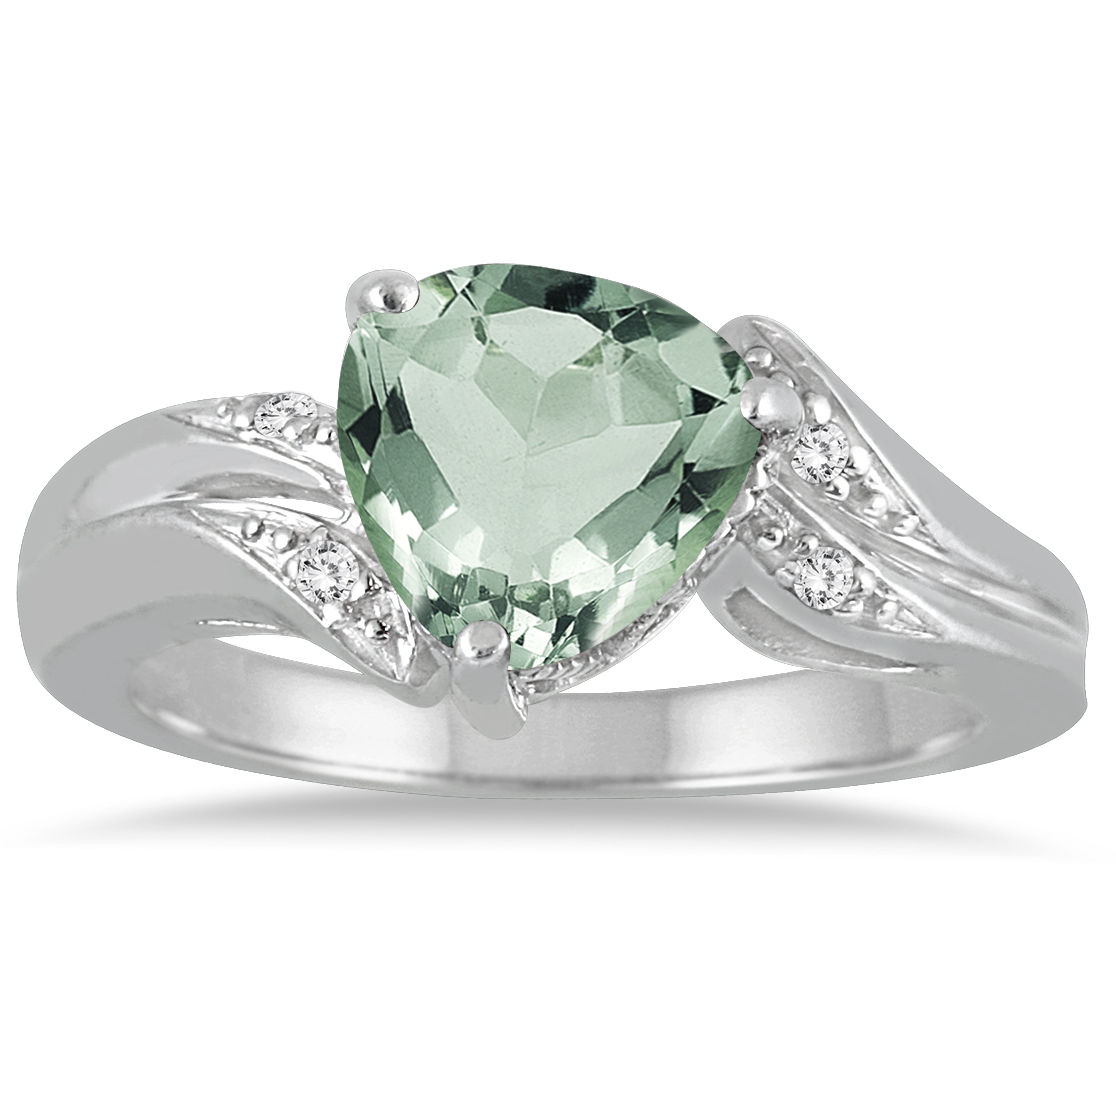 2 1/4 Carat Trillion Cut Green Amethyst and Diamond Ring in 10K White Gold